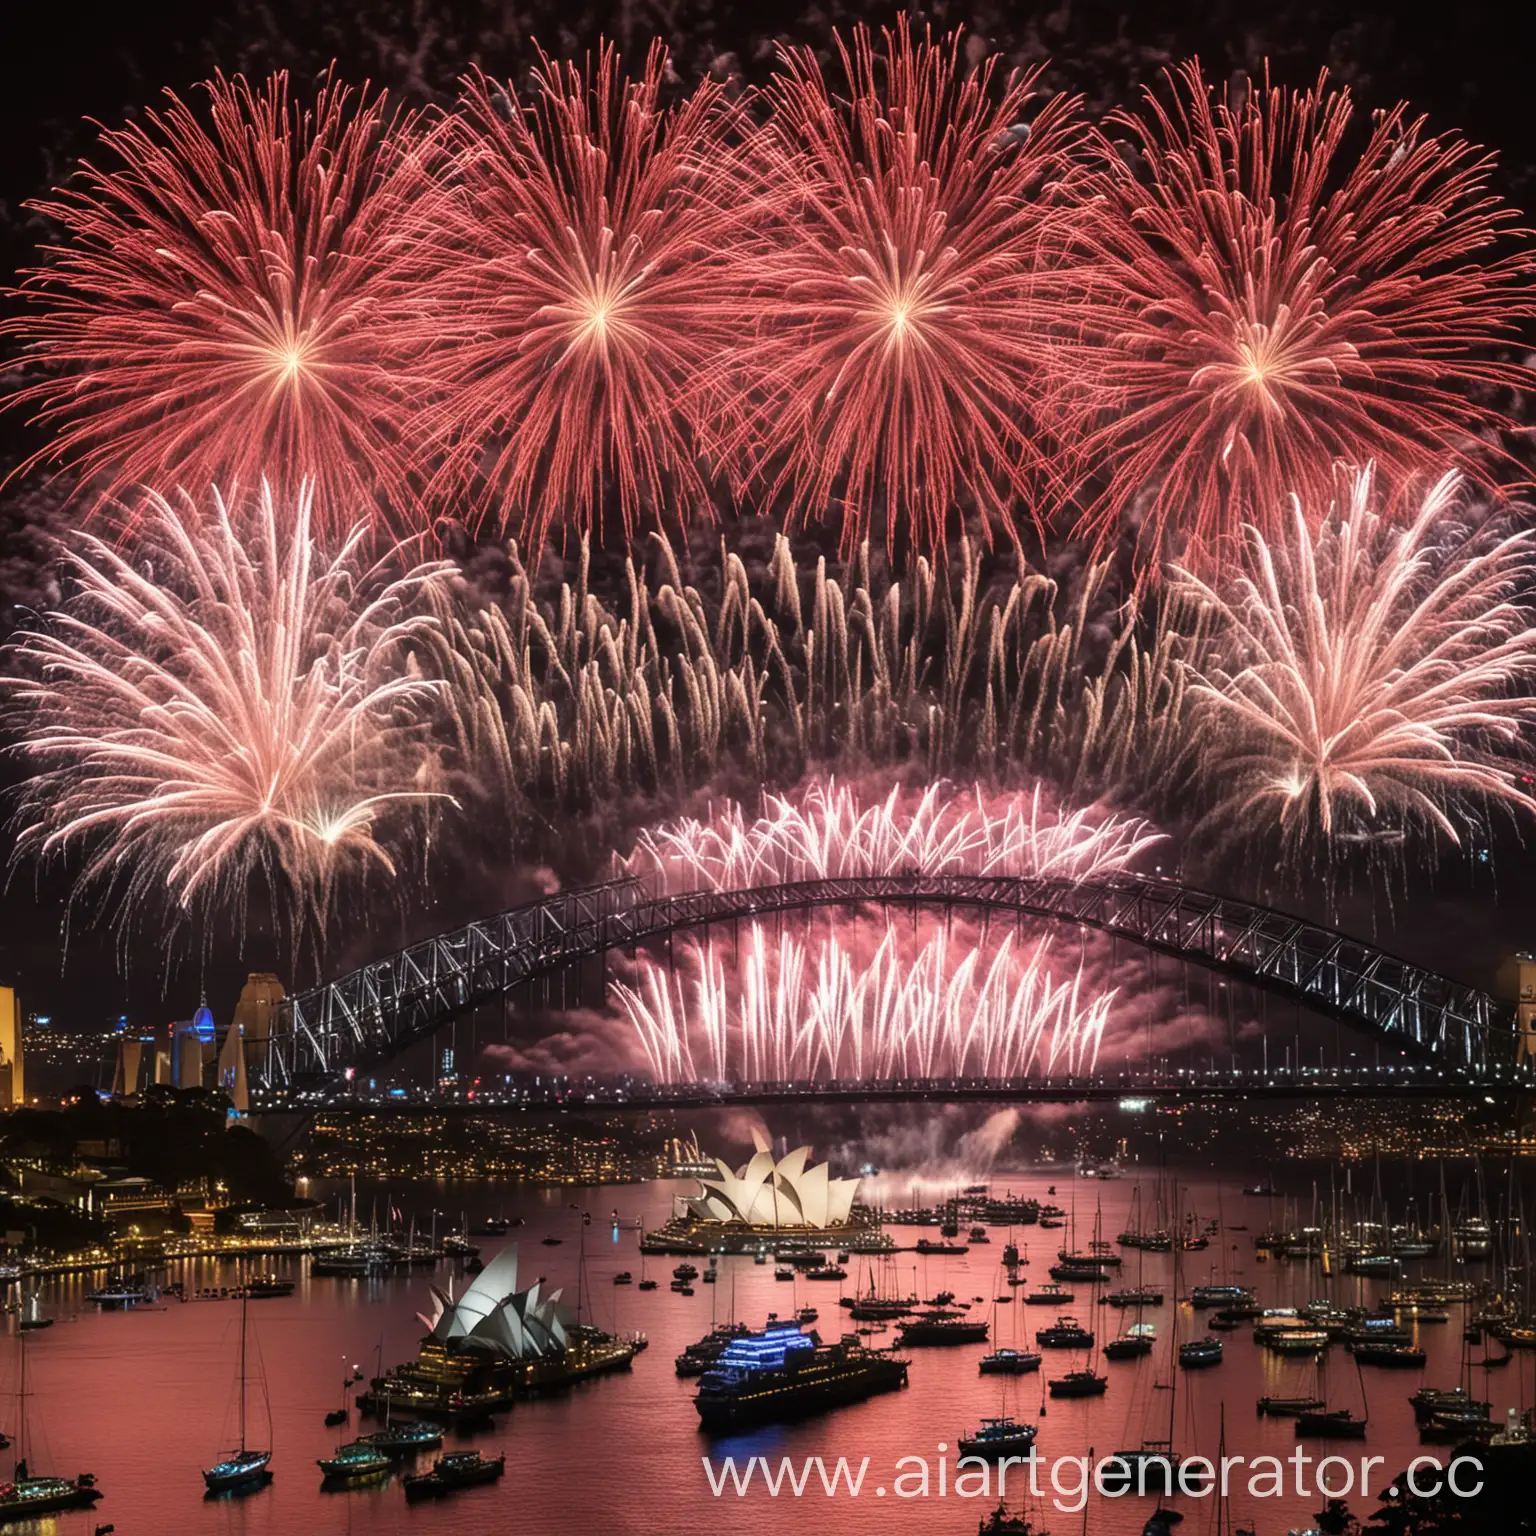 New Year's Eve fireworks over Sydney Harbour, symbolizing global celebrations and the joy of new beginnings.